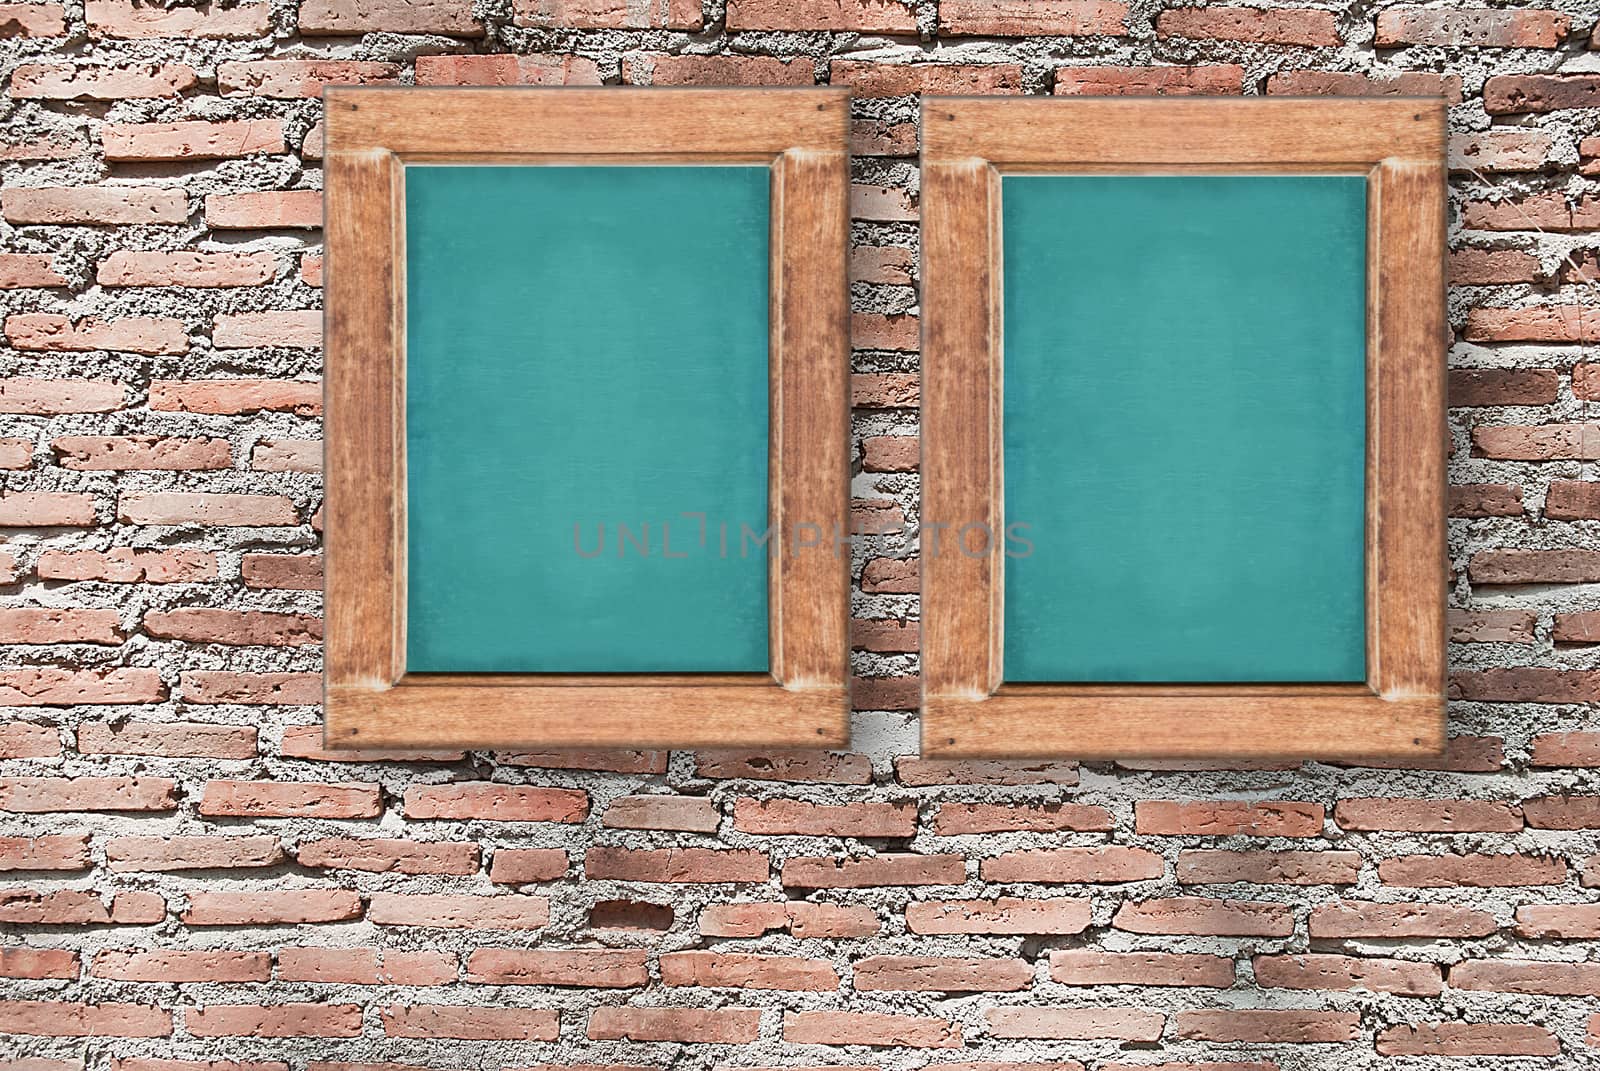 Image of chalkboard on brick wall texture, background for design with copy space for text or image.